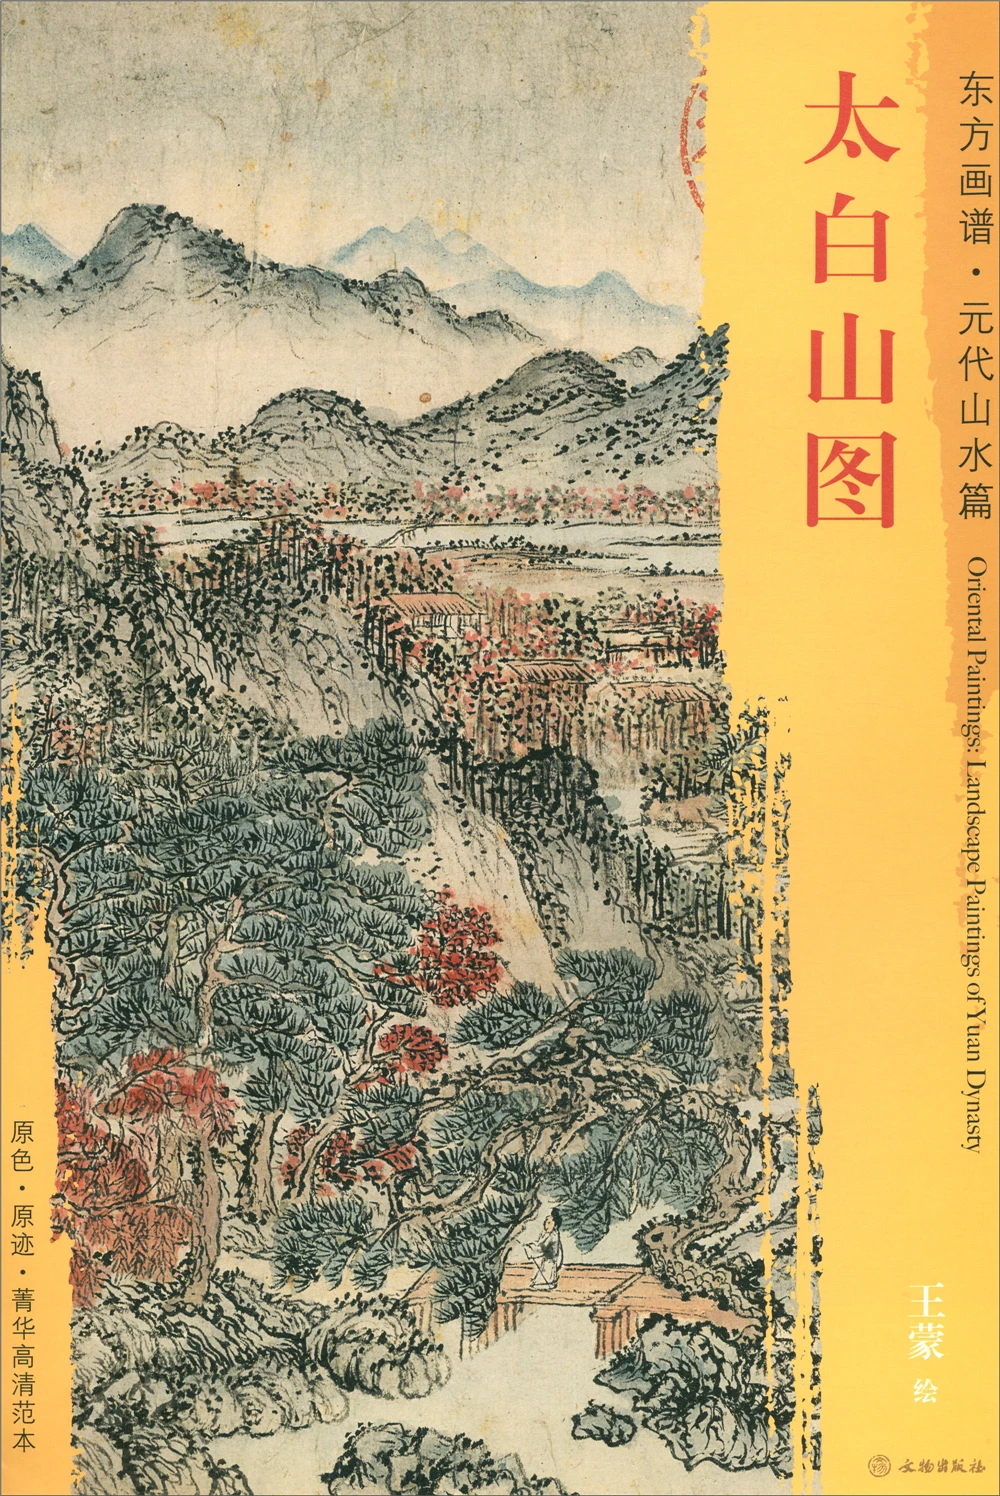 

Oriental Paintings. Landscapes of Yuan Dynasty Taibai Mountain Sketch book Art Drawing Painting copyBook for training